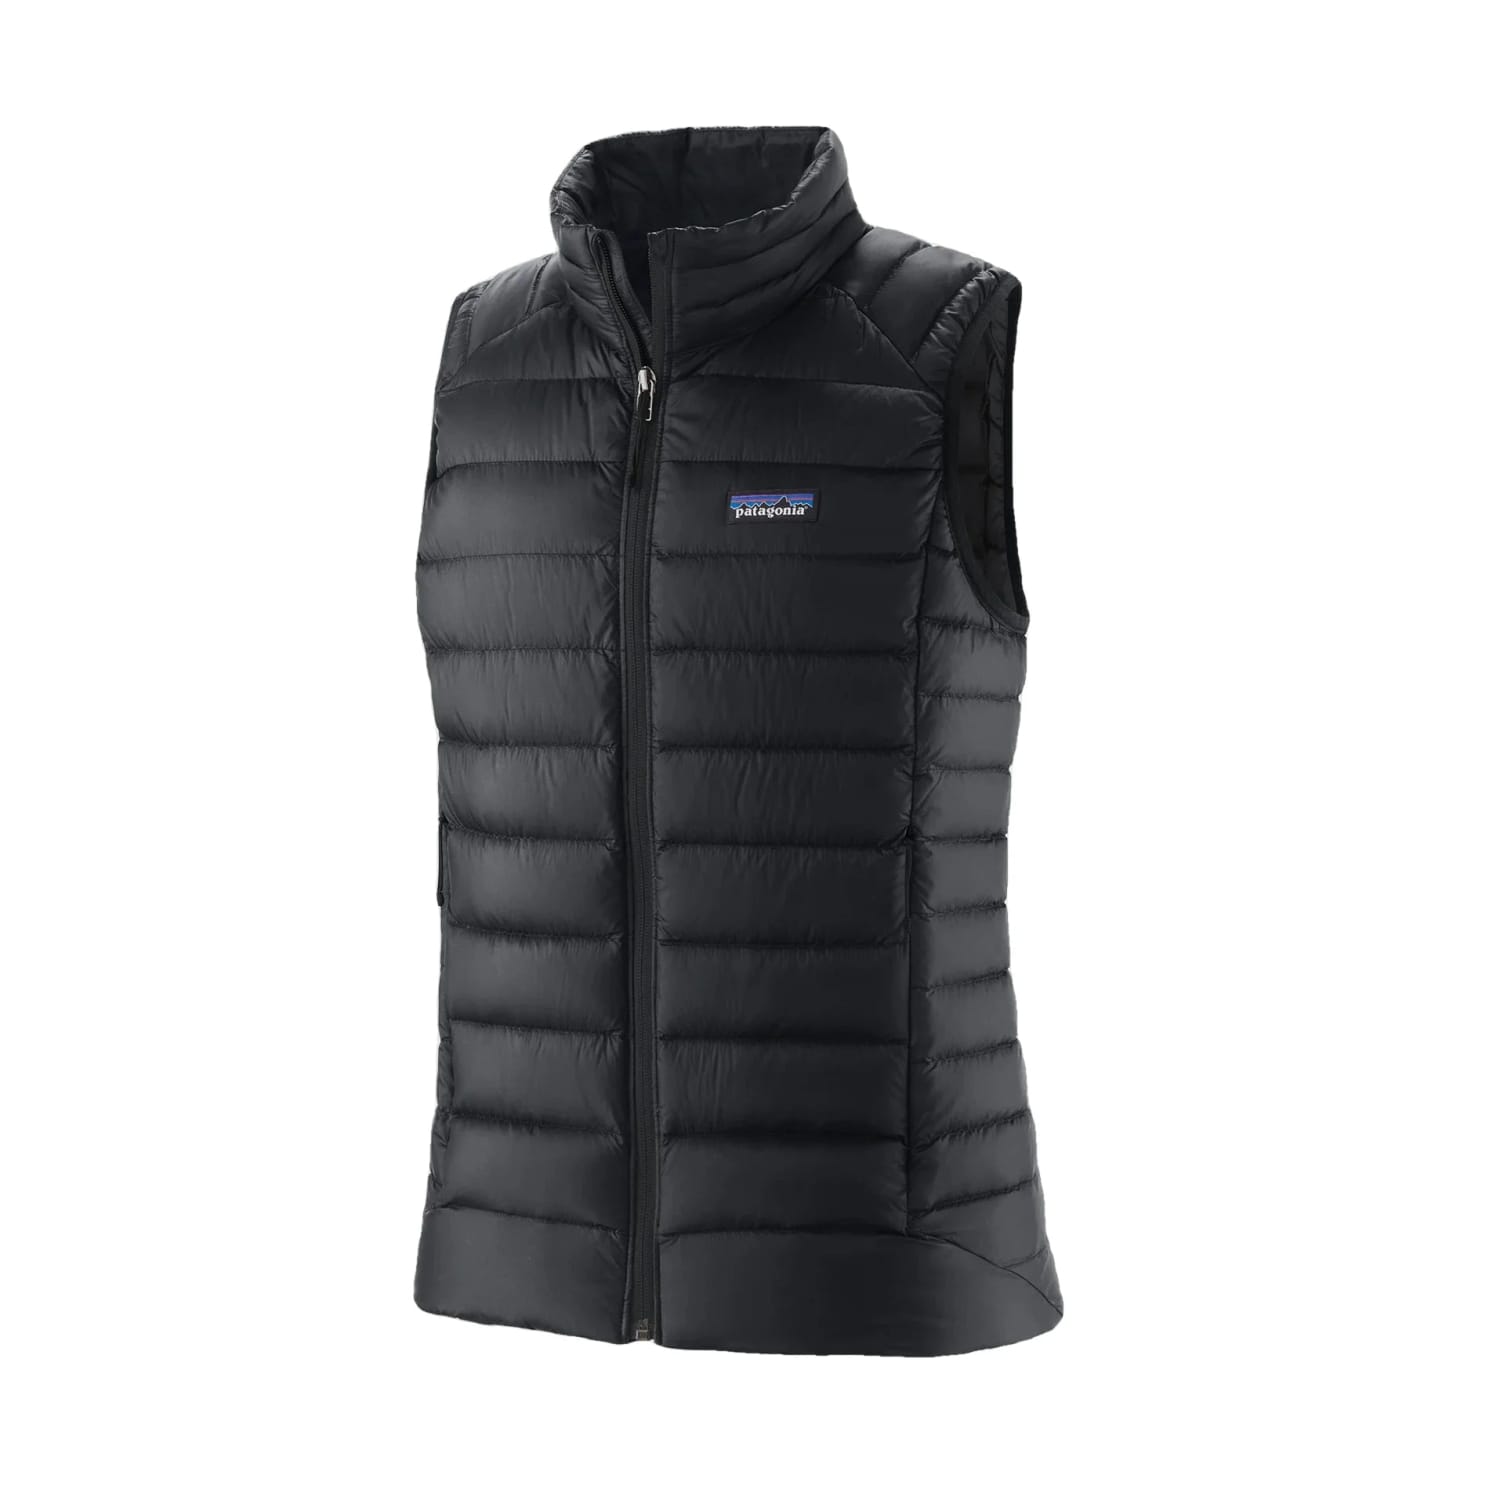 Patagonia W's Down Sweater Vest, Black, front view 